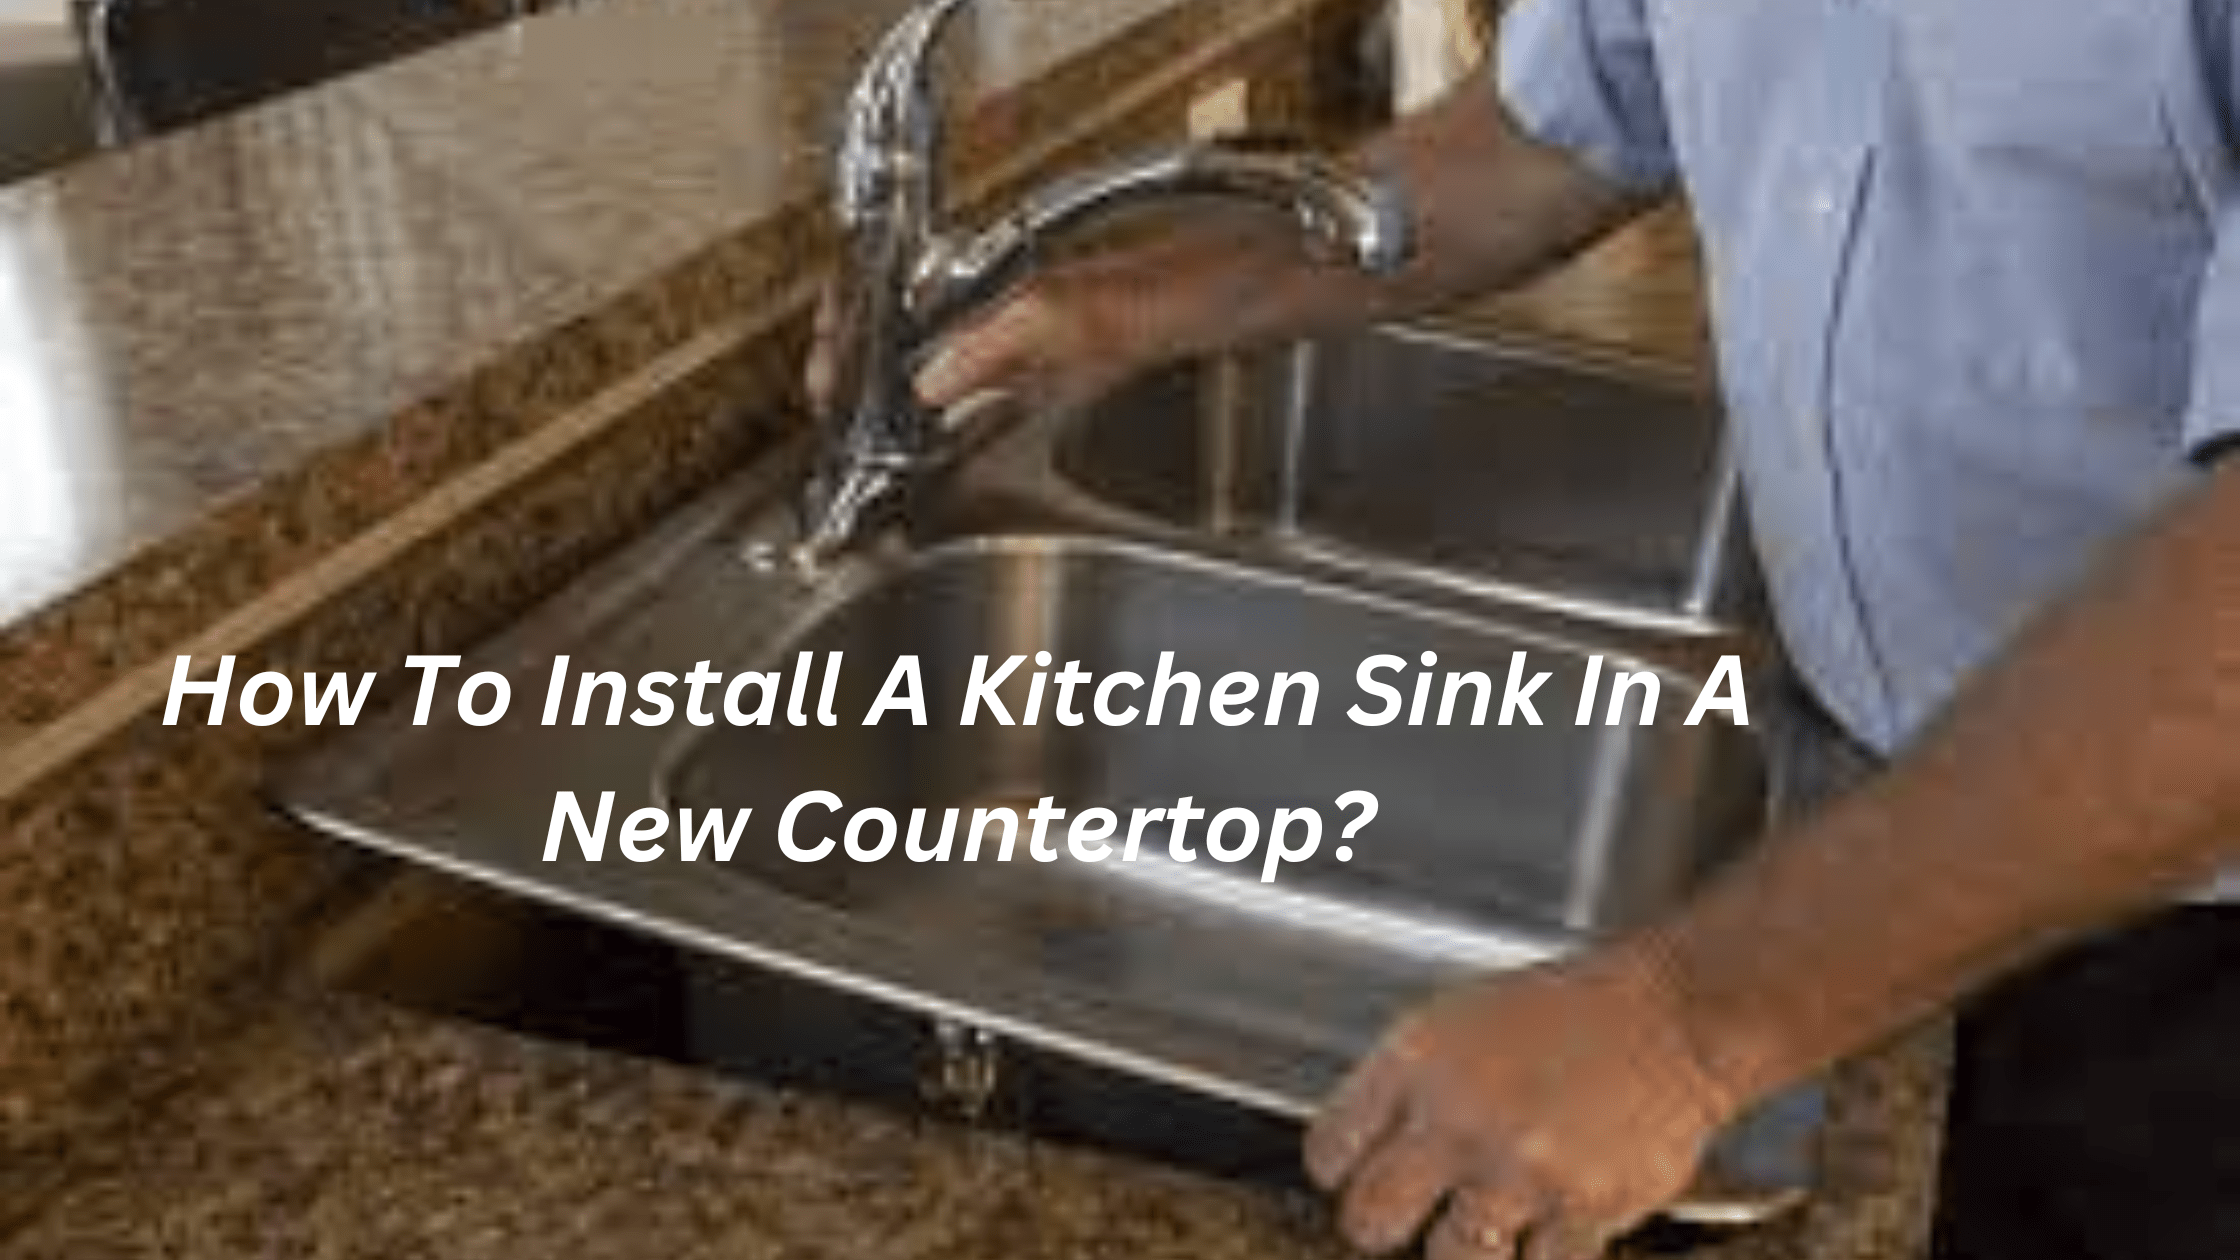 How To Install A Kitchen Sink In A New Countertop?